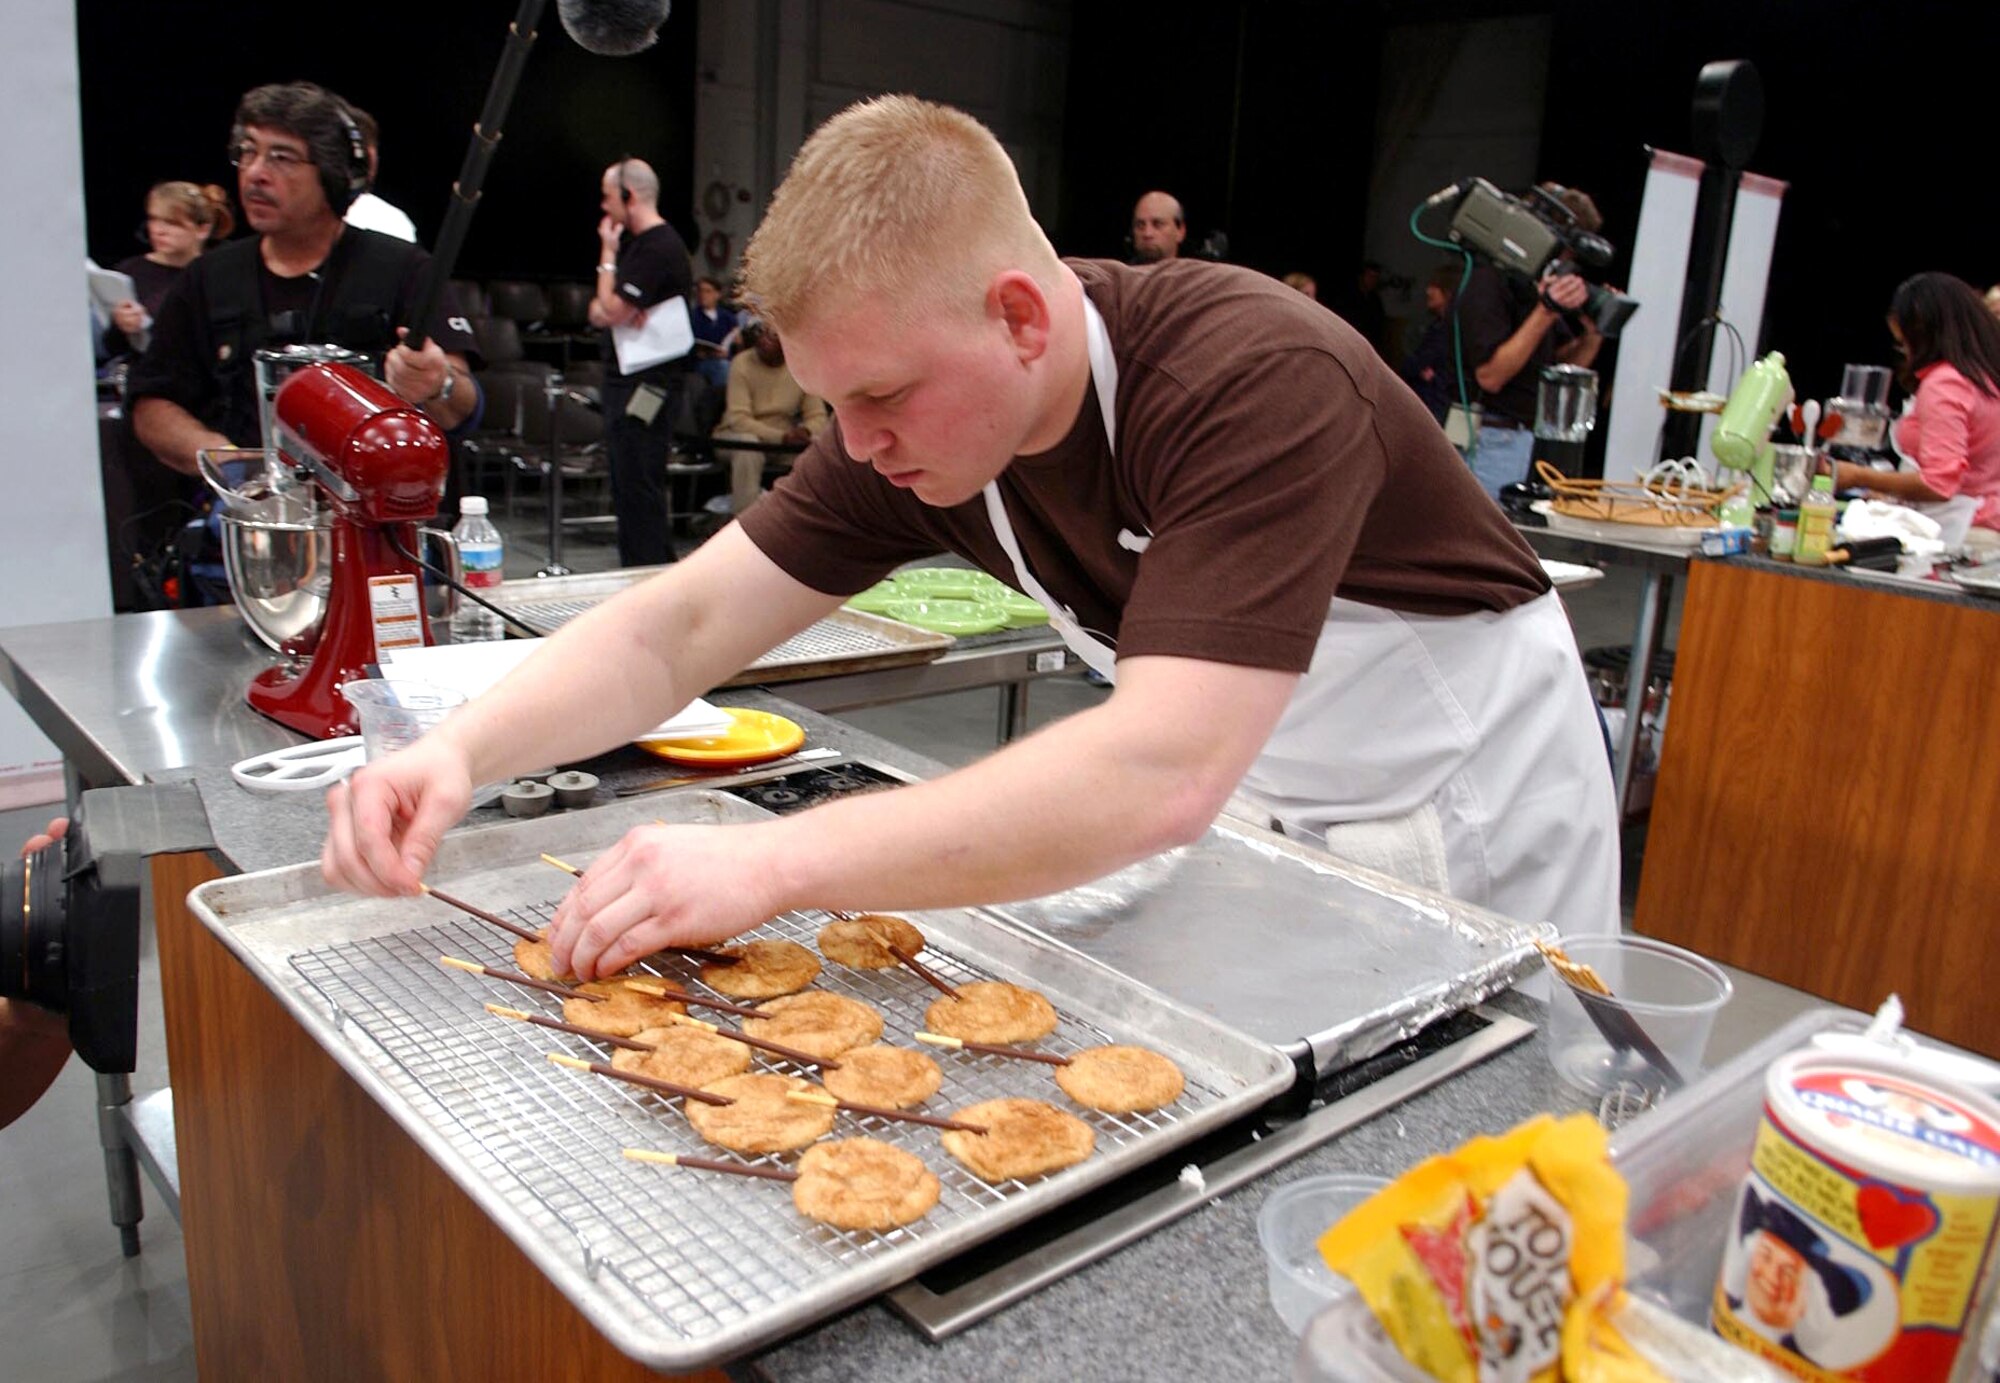 Senior Airman David Sutherland prepares his snickerdoodle pop cookies to compete against four others during the 2006 Food Network Cookie Challenge Monday, March 20 in Denver.  Airman Sutherland is a missile chef with the 741st Missile Squadron, Minot Air Force Base, N.D. (U.S. Air Force photo/Senior Airman Taylor Marr)